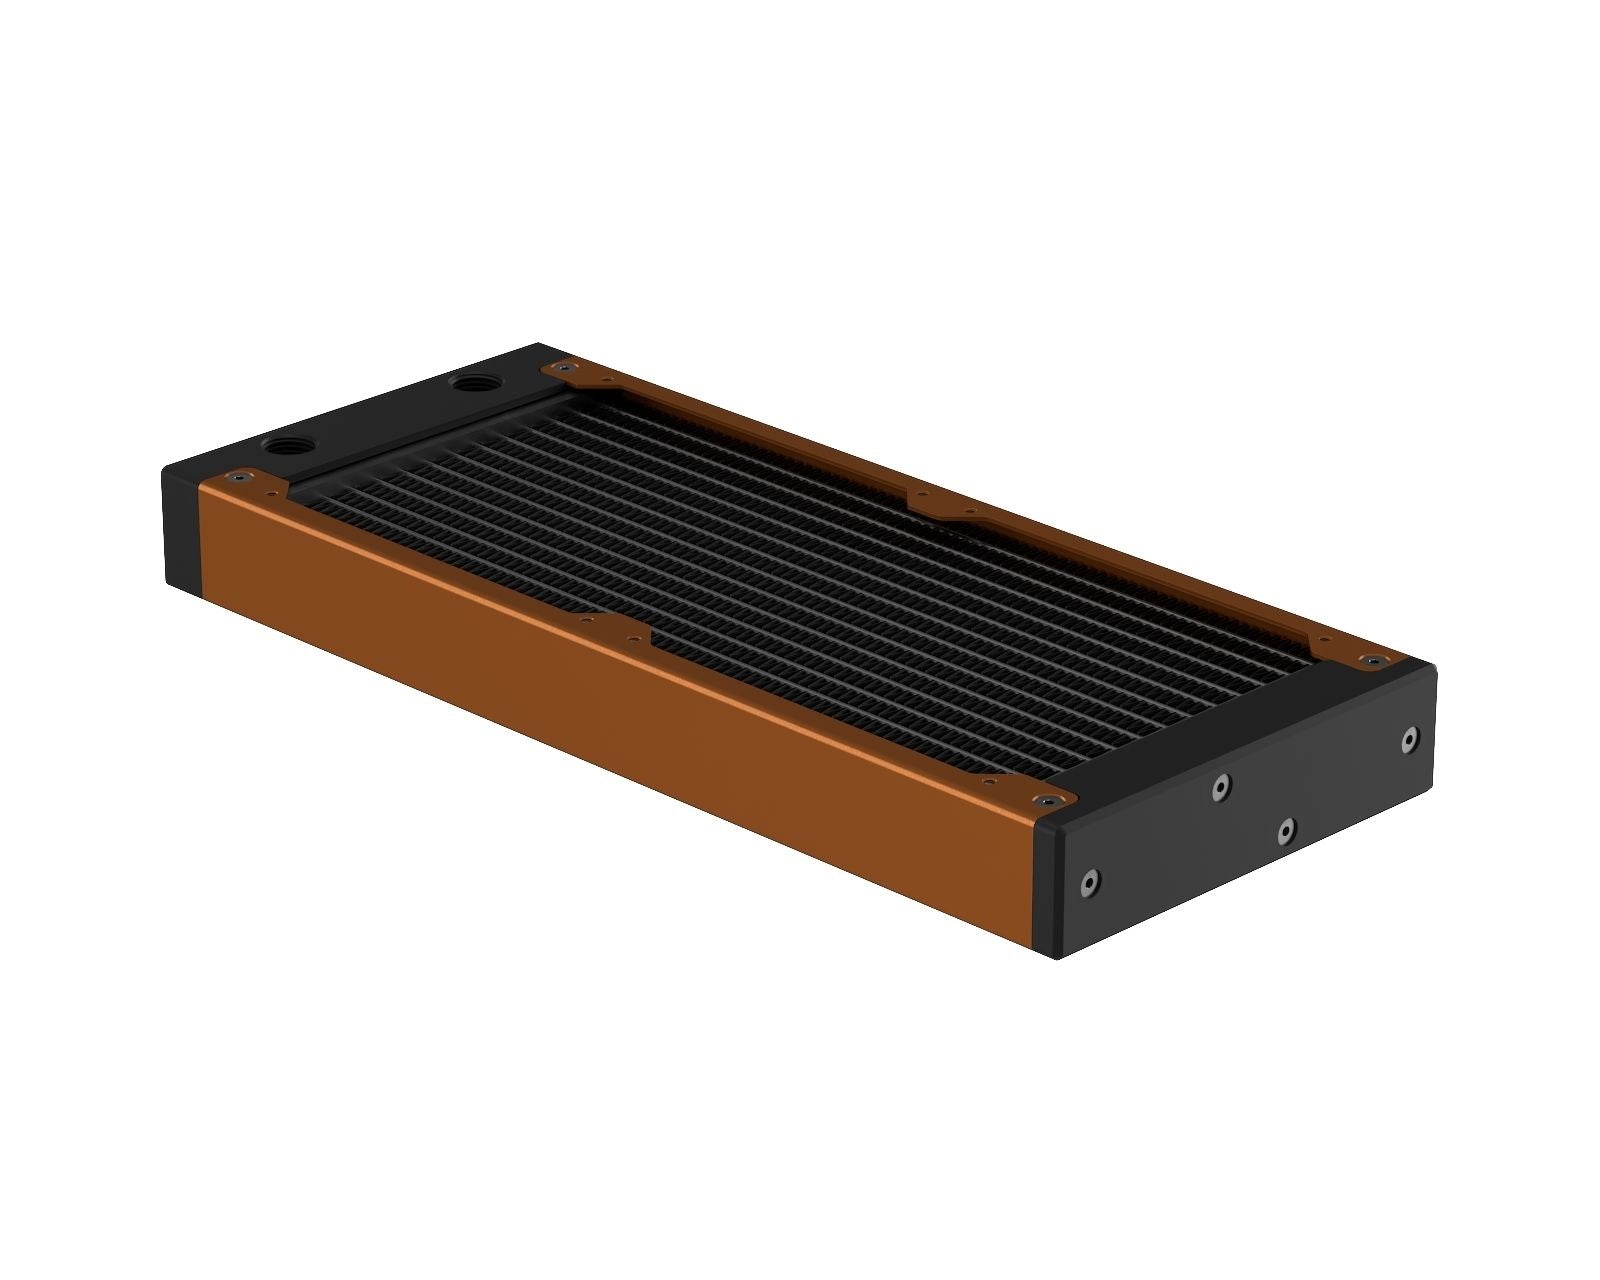 PrimoChill 240SL (30mm) EXIMO Modular Radiator, Black POM, 2x120mm, Dual Fan (R-SL-BK24) Available in 20+ Colors, Assembled in USA and Custom Watercooling Loop Ready - Copper